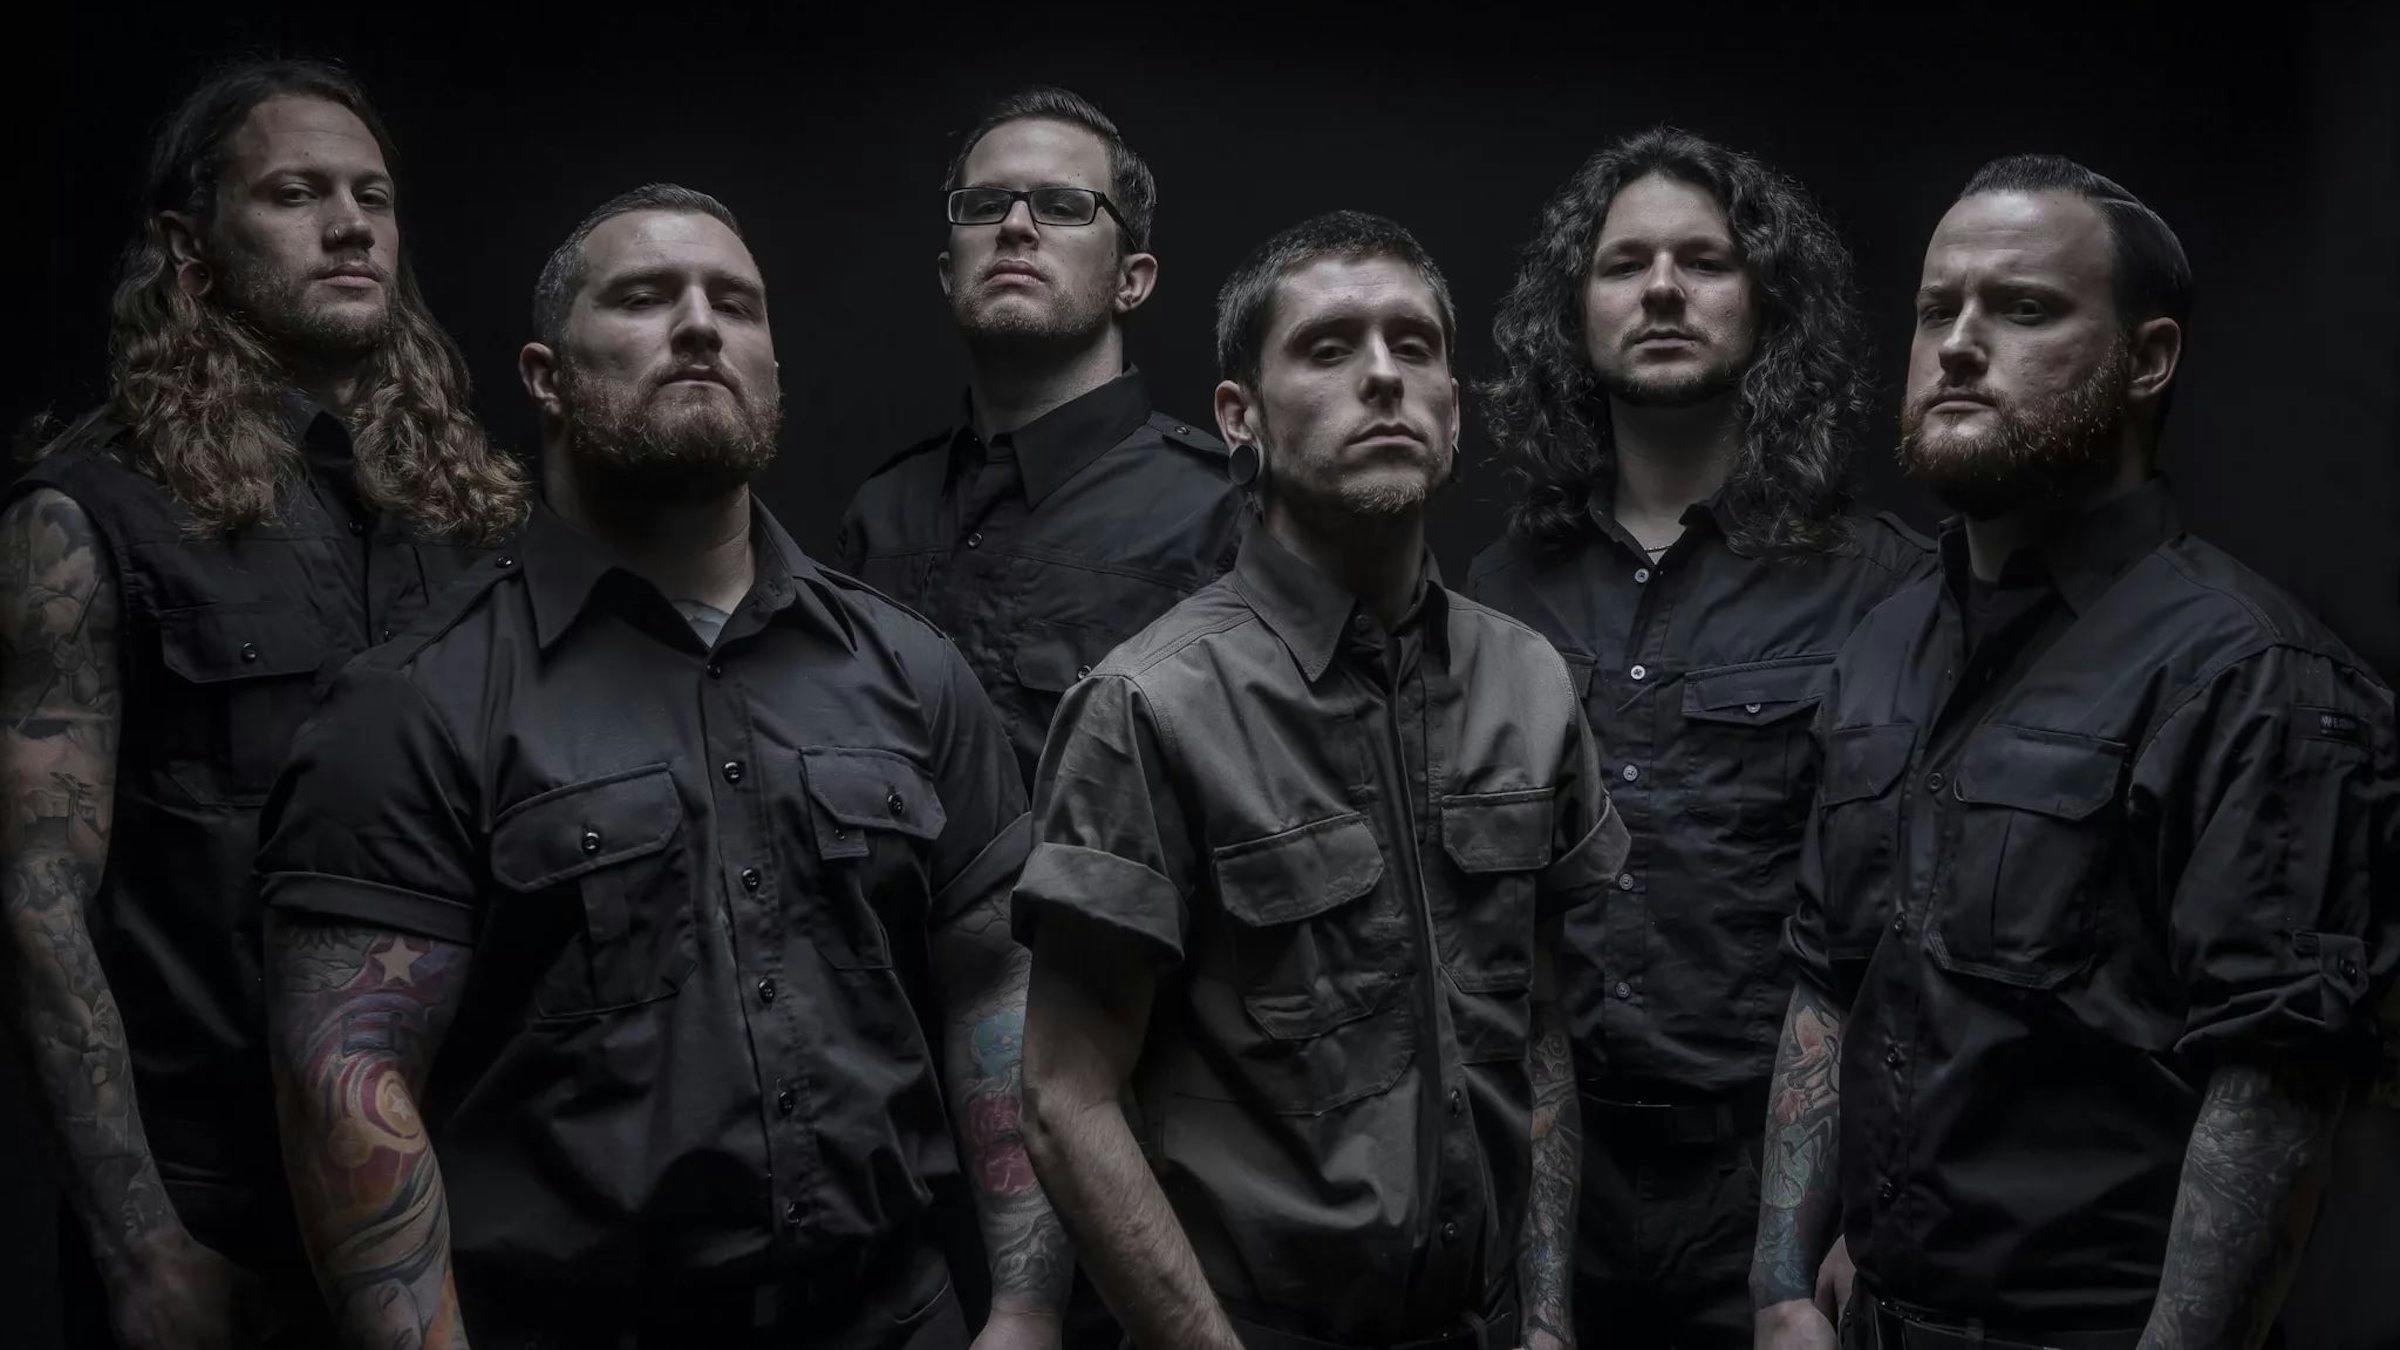 Whitechapel Stream New Track, Announce Co-Headlining Tour With Dying Fetus